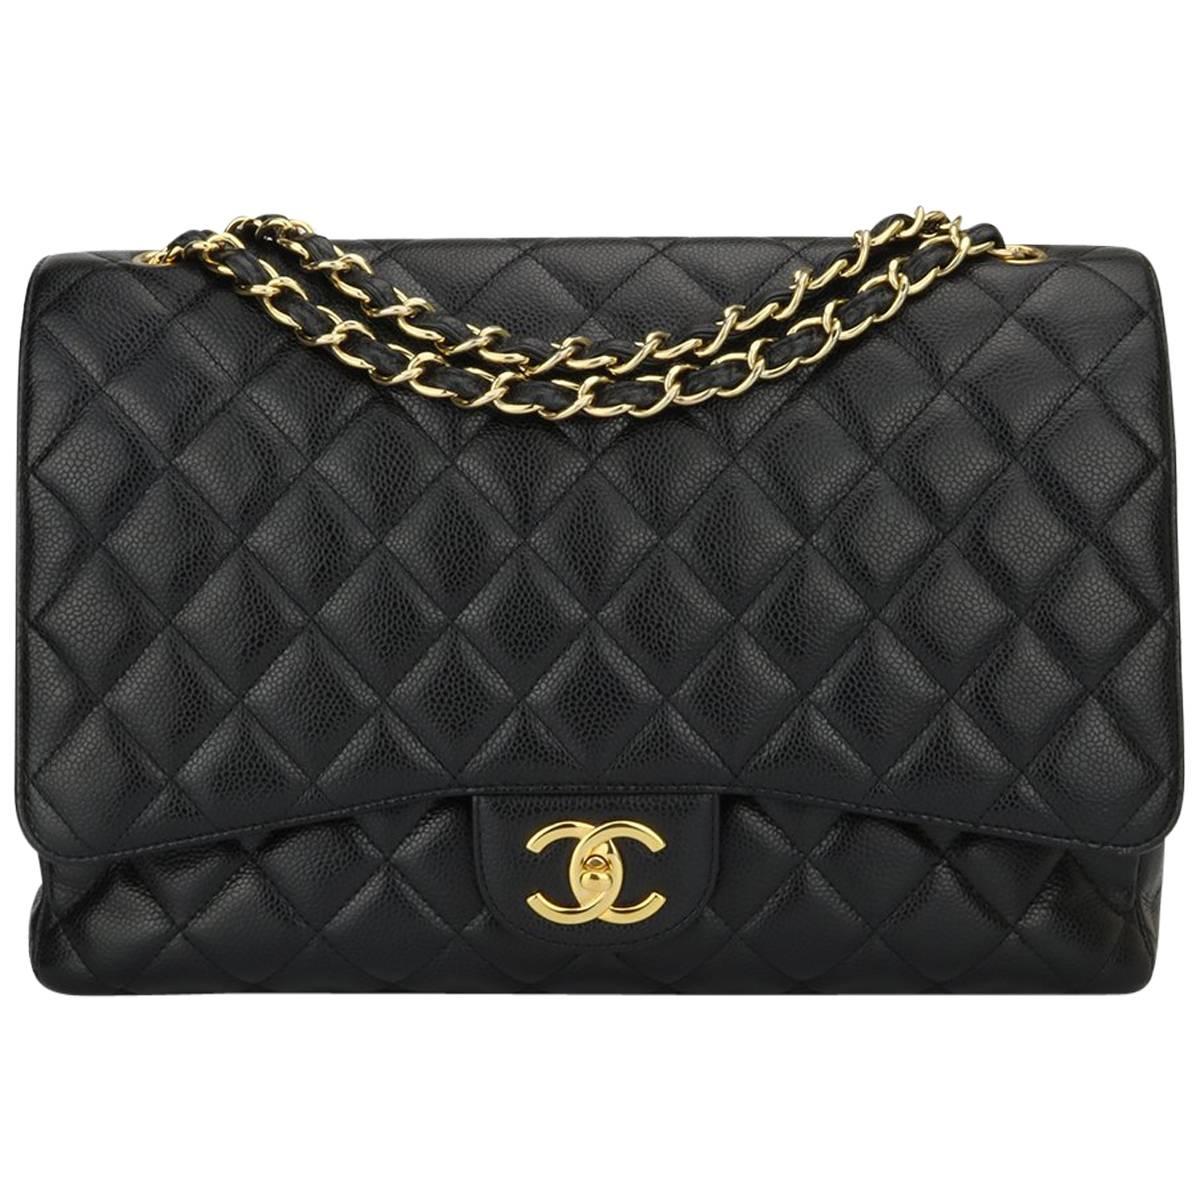 CHANEL Black Caviar Maxi Double Flap with Gold Hardware 2012